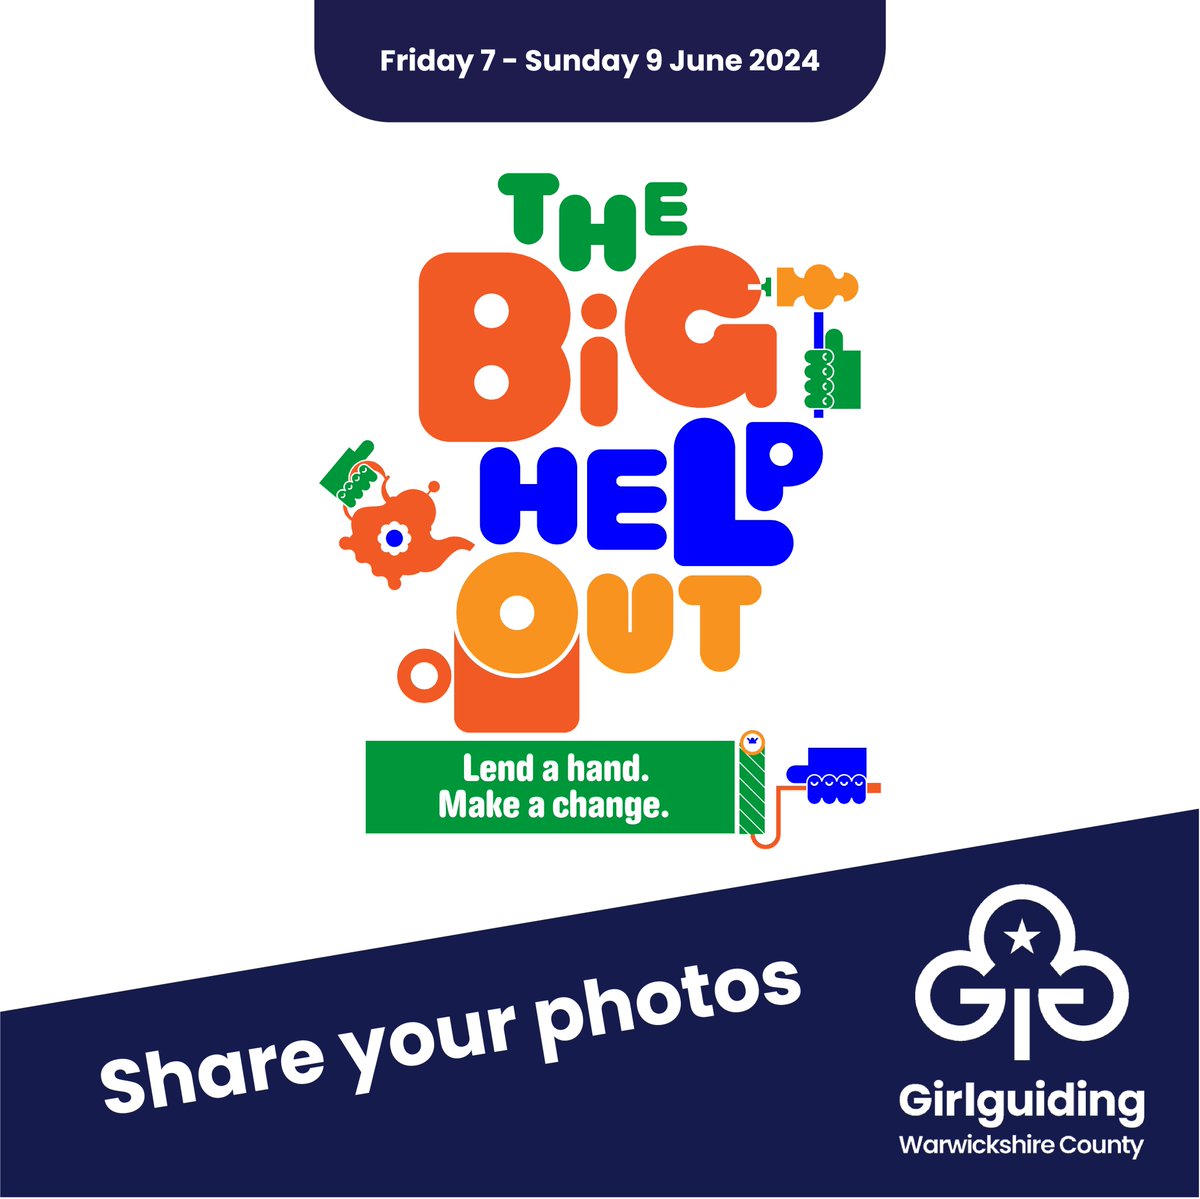 We’re joining #TheBigHelpOut in 7-9th June 2024! 🤝

Volunteers are superheroes 🦸‍♀️ so this year, we’re inviting you to make a difference within communities.

However you are taking part, please send your photos to communications@ggw.org.uk 📩

#girlguidingwarwickshire